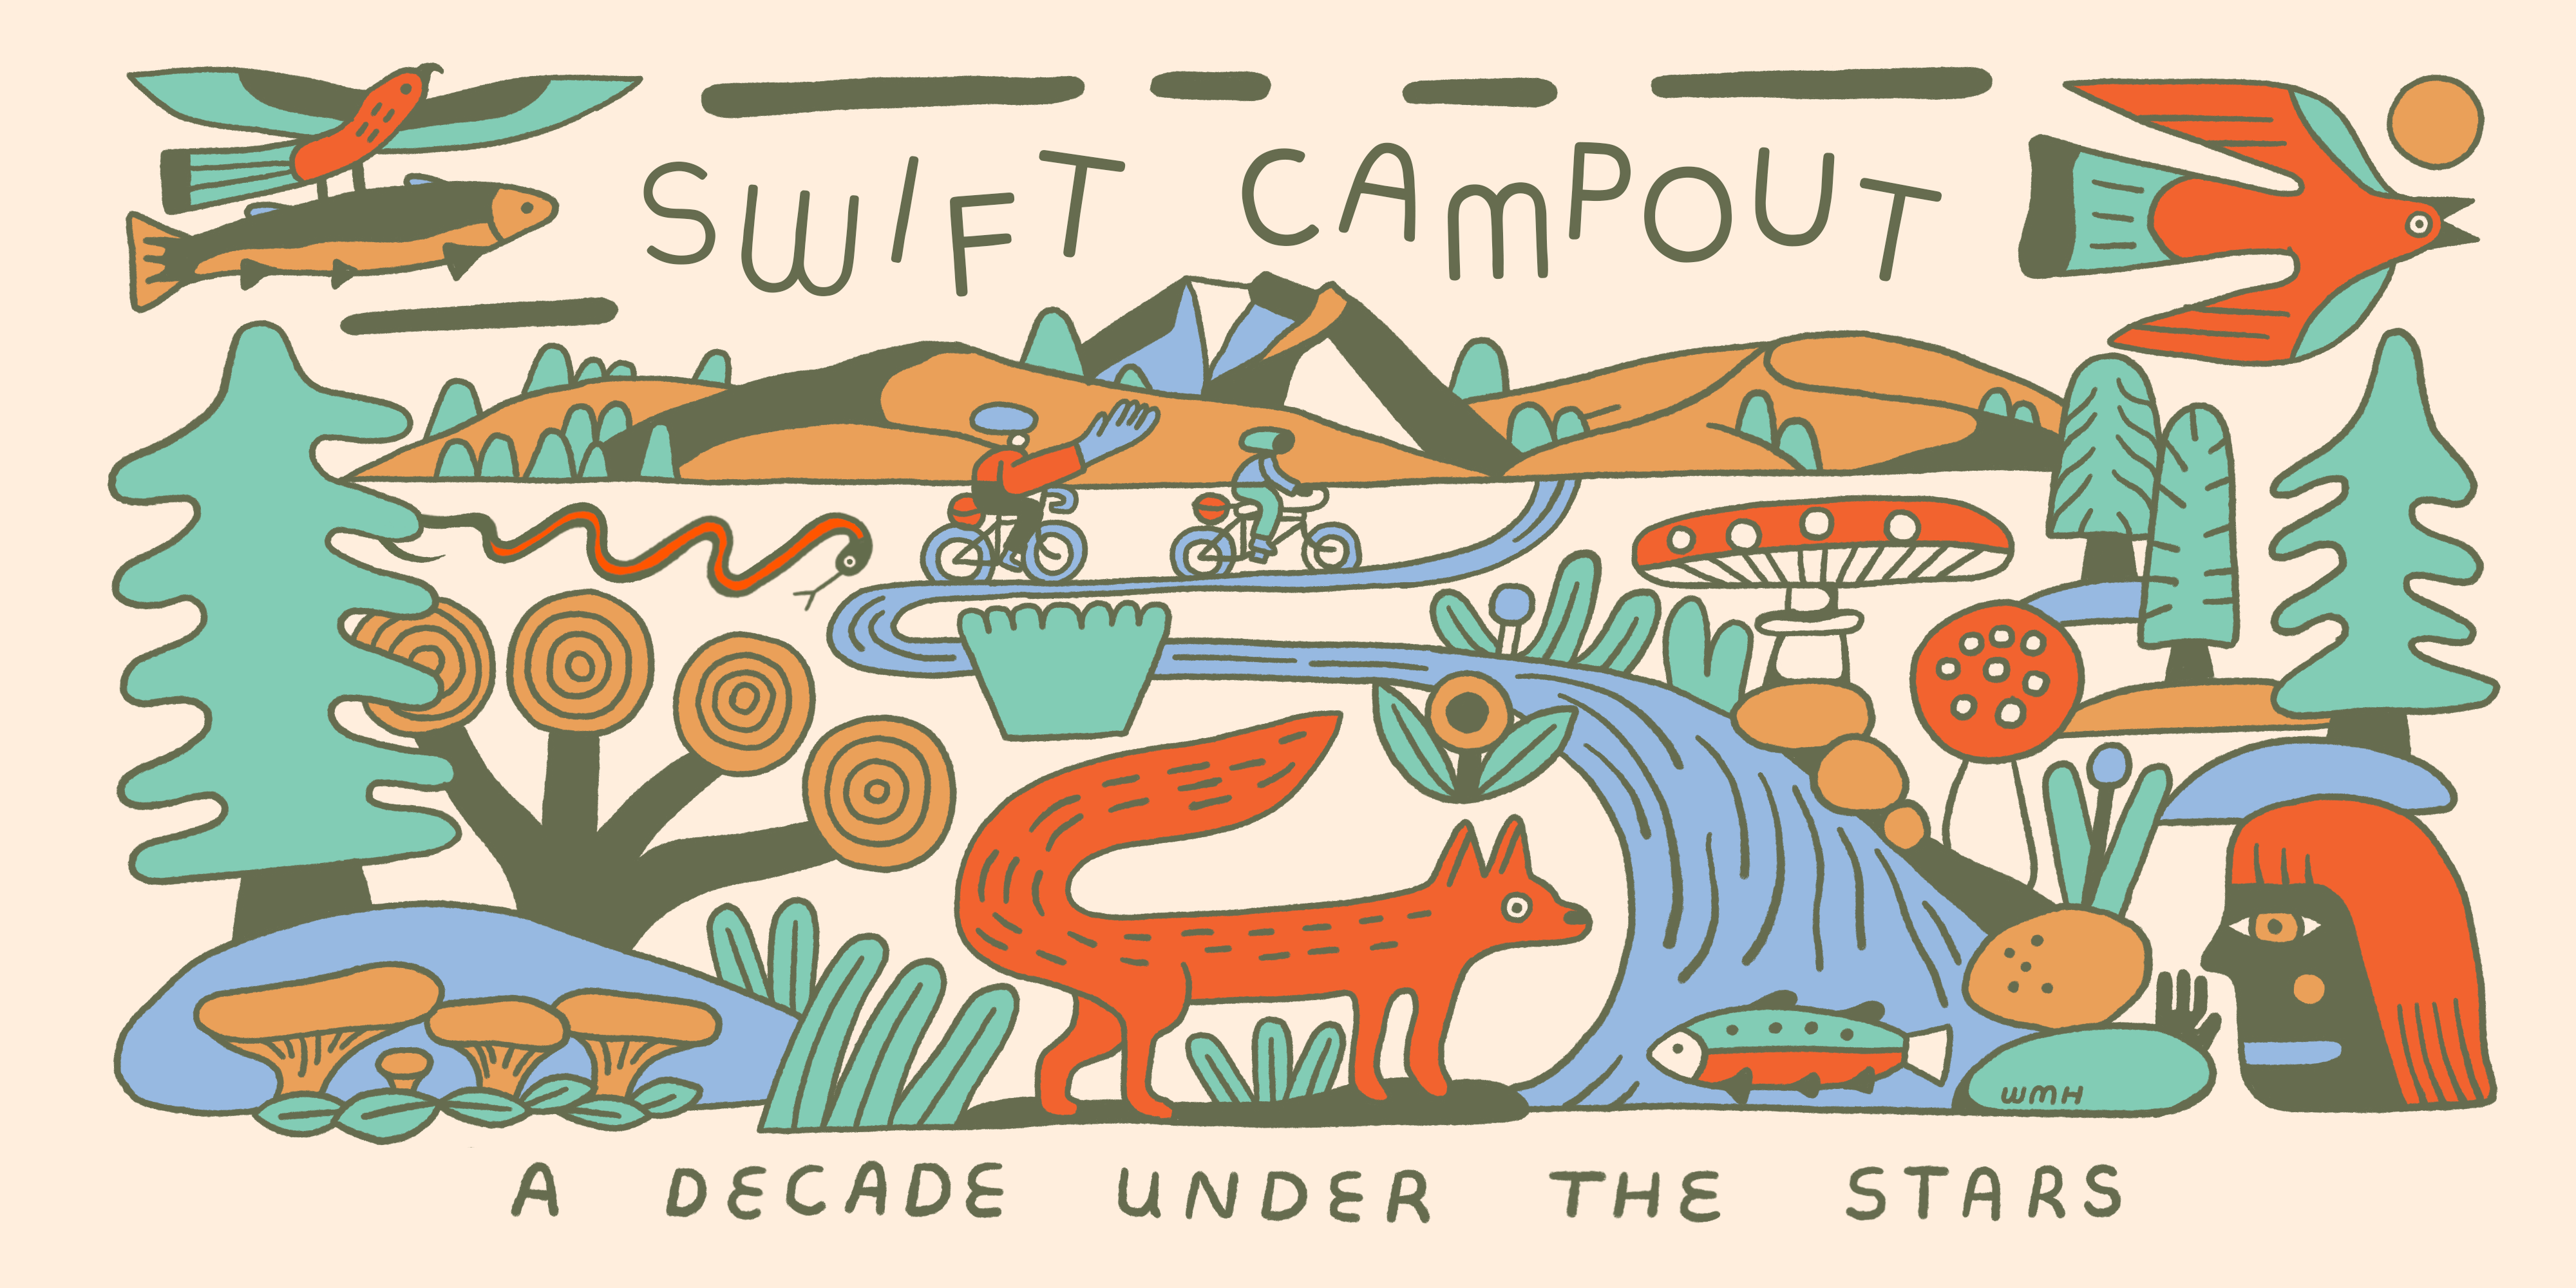 Swift Campout. A decade under the stars.